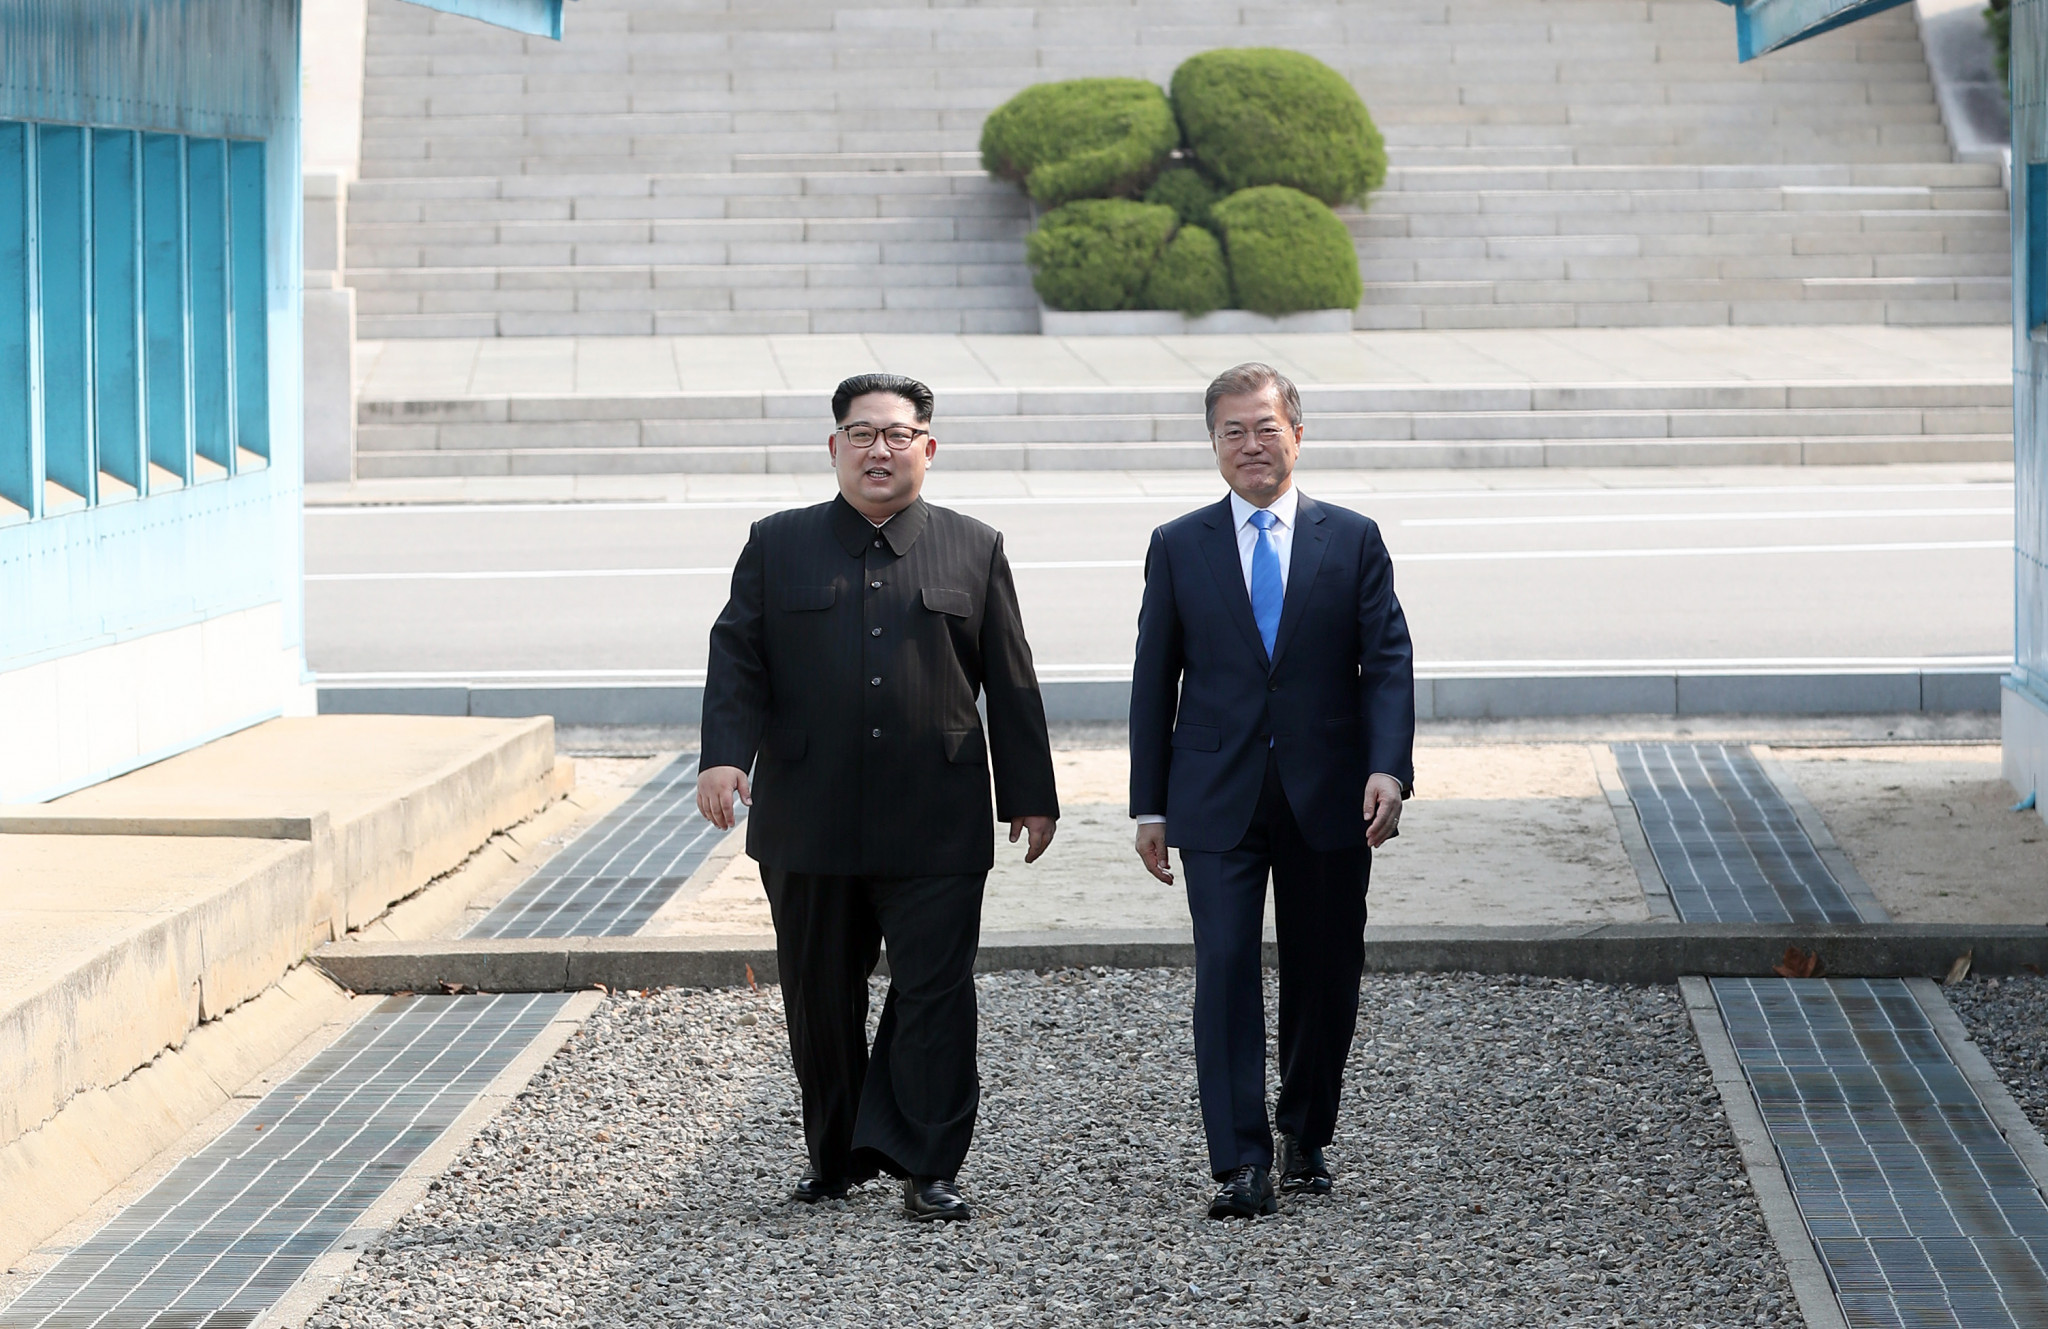 North Korean leader Kim Jong-un, left, has met with his southern counterpart Moon Jae-in on South Korean soil this year ©Getty Images